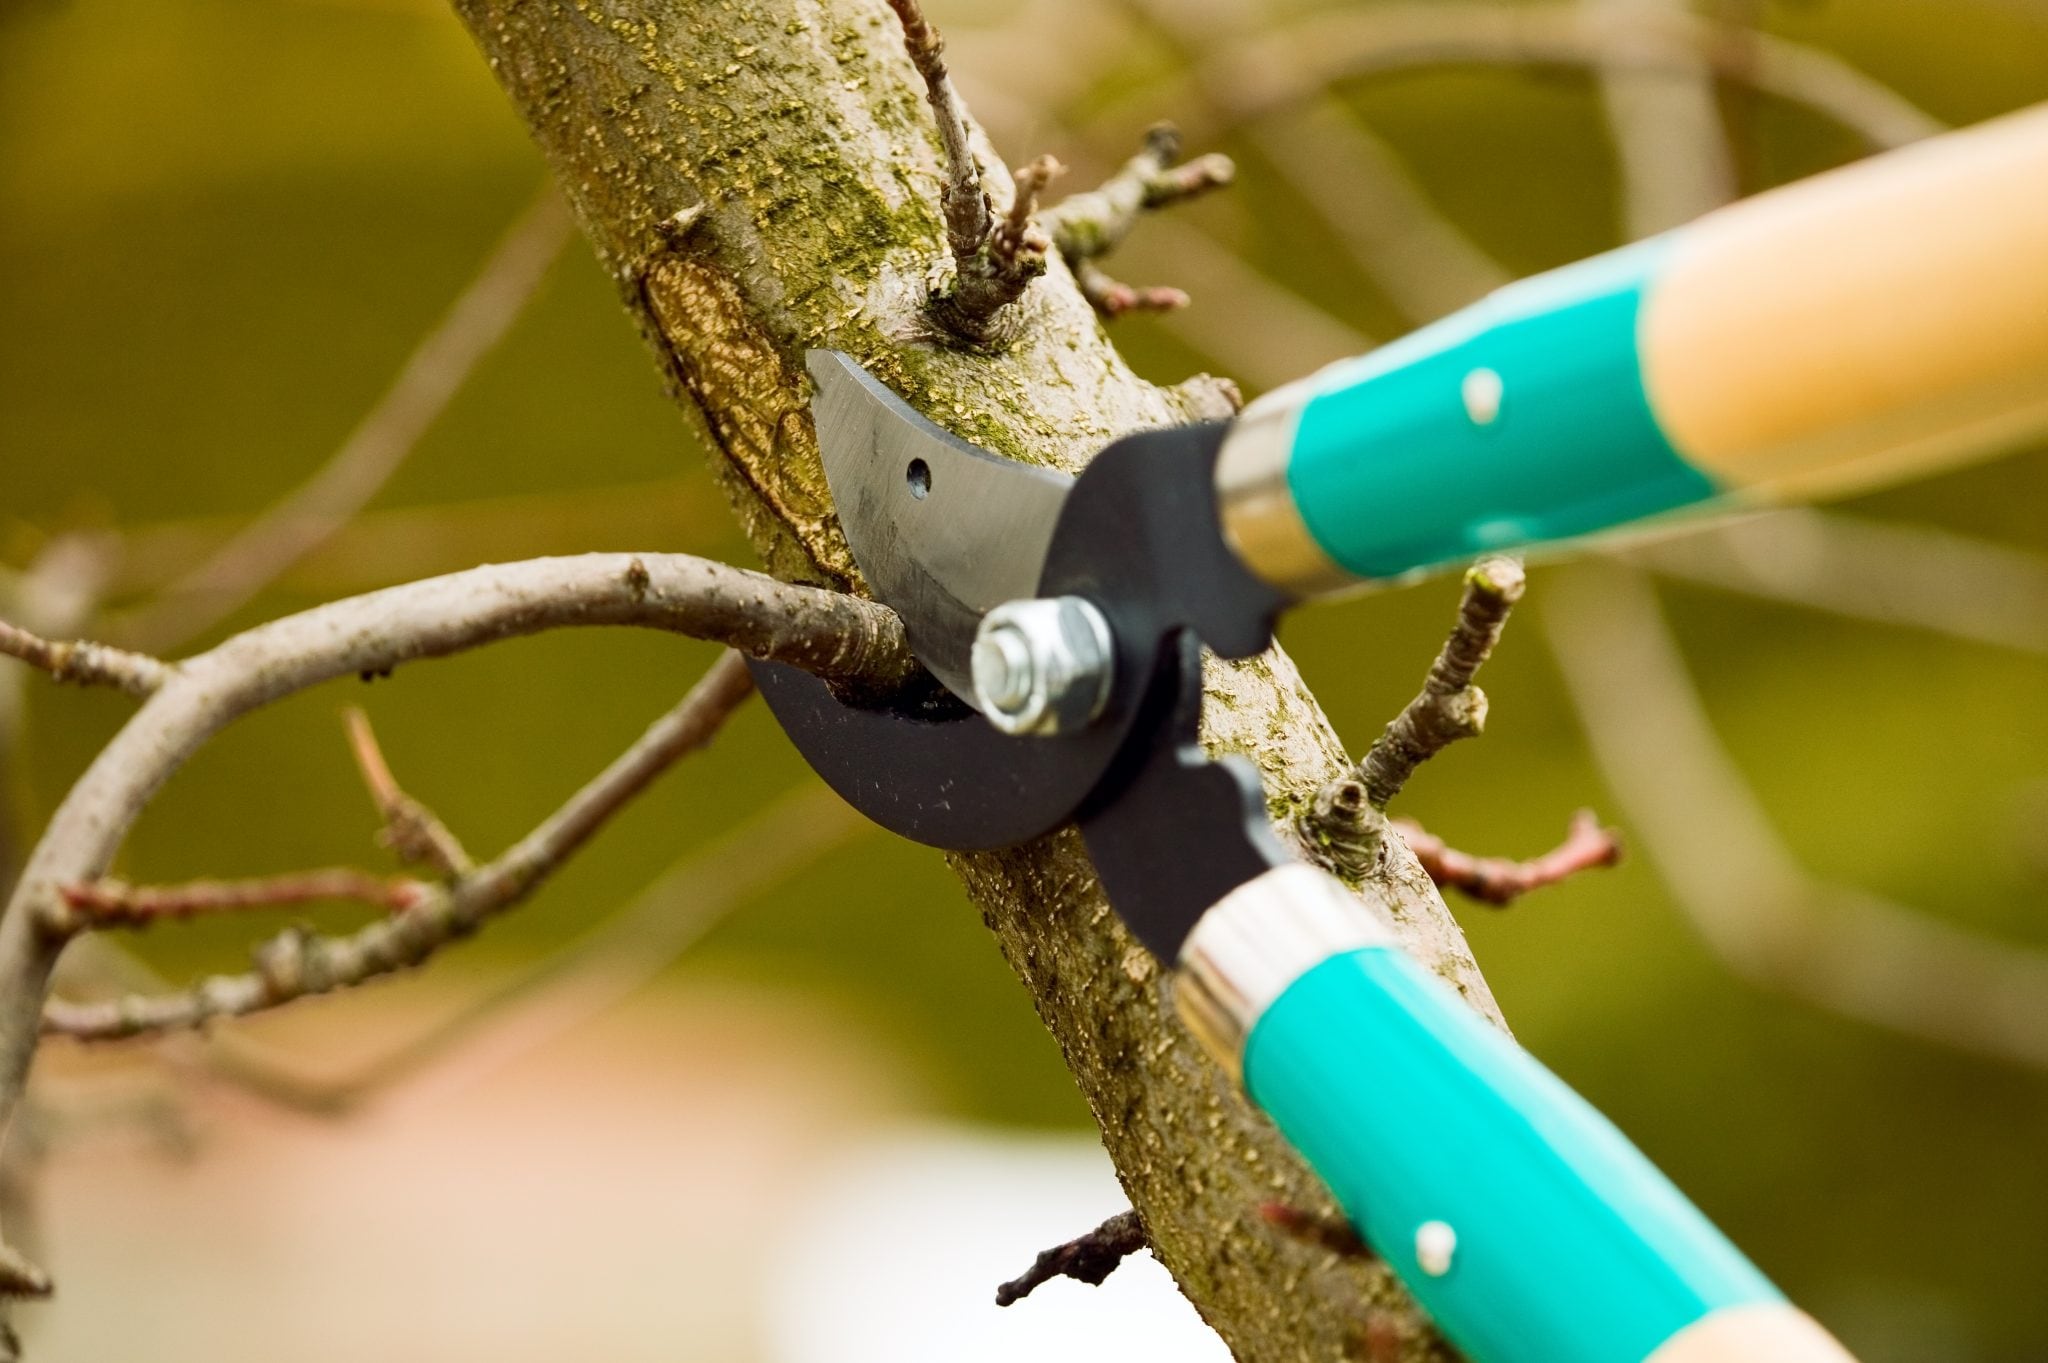 Pruning Tree for Health and Beauty